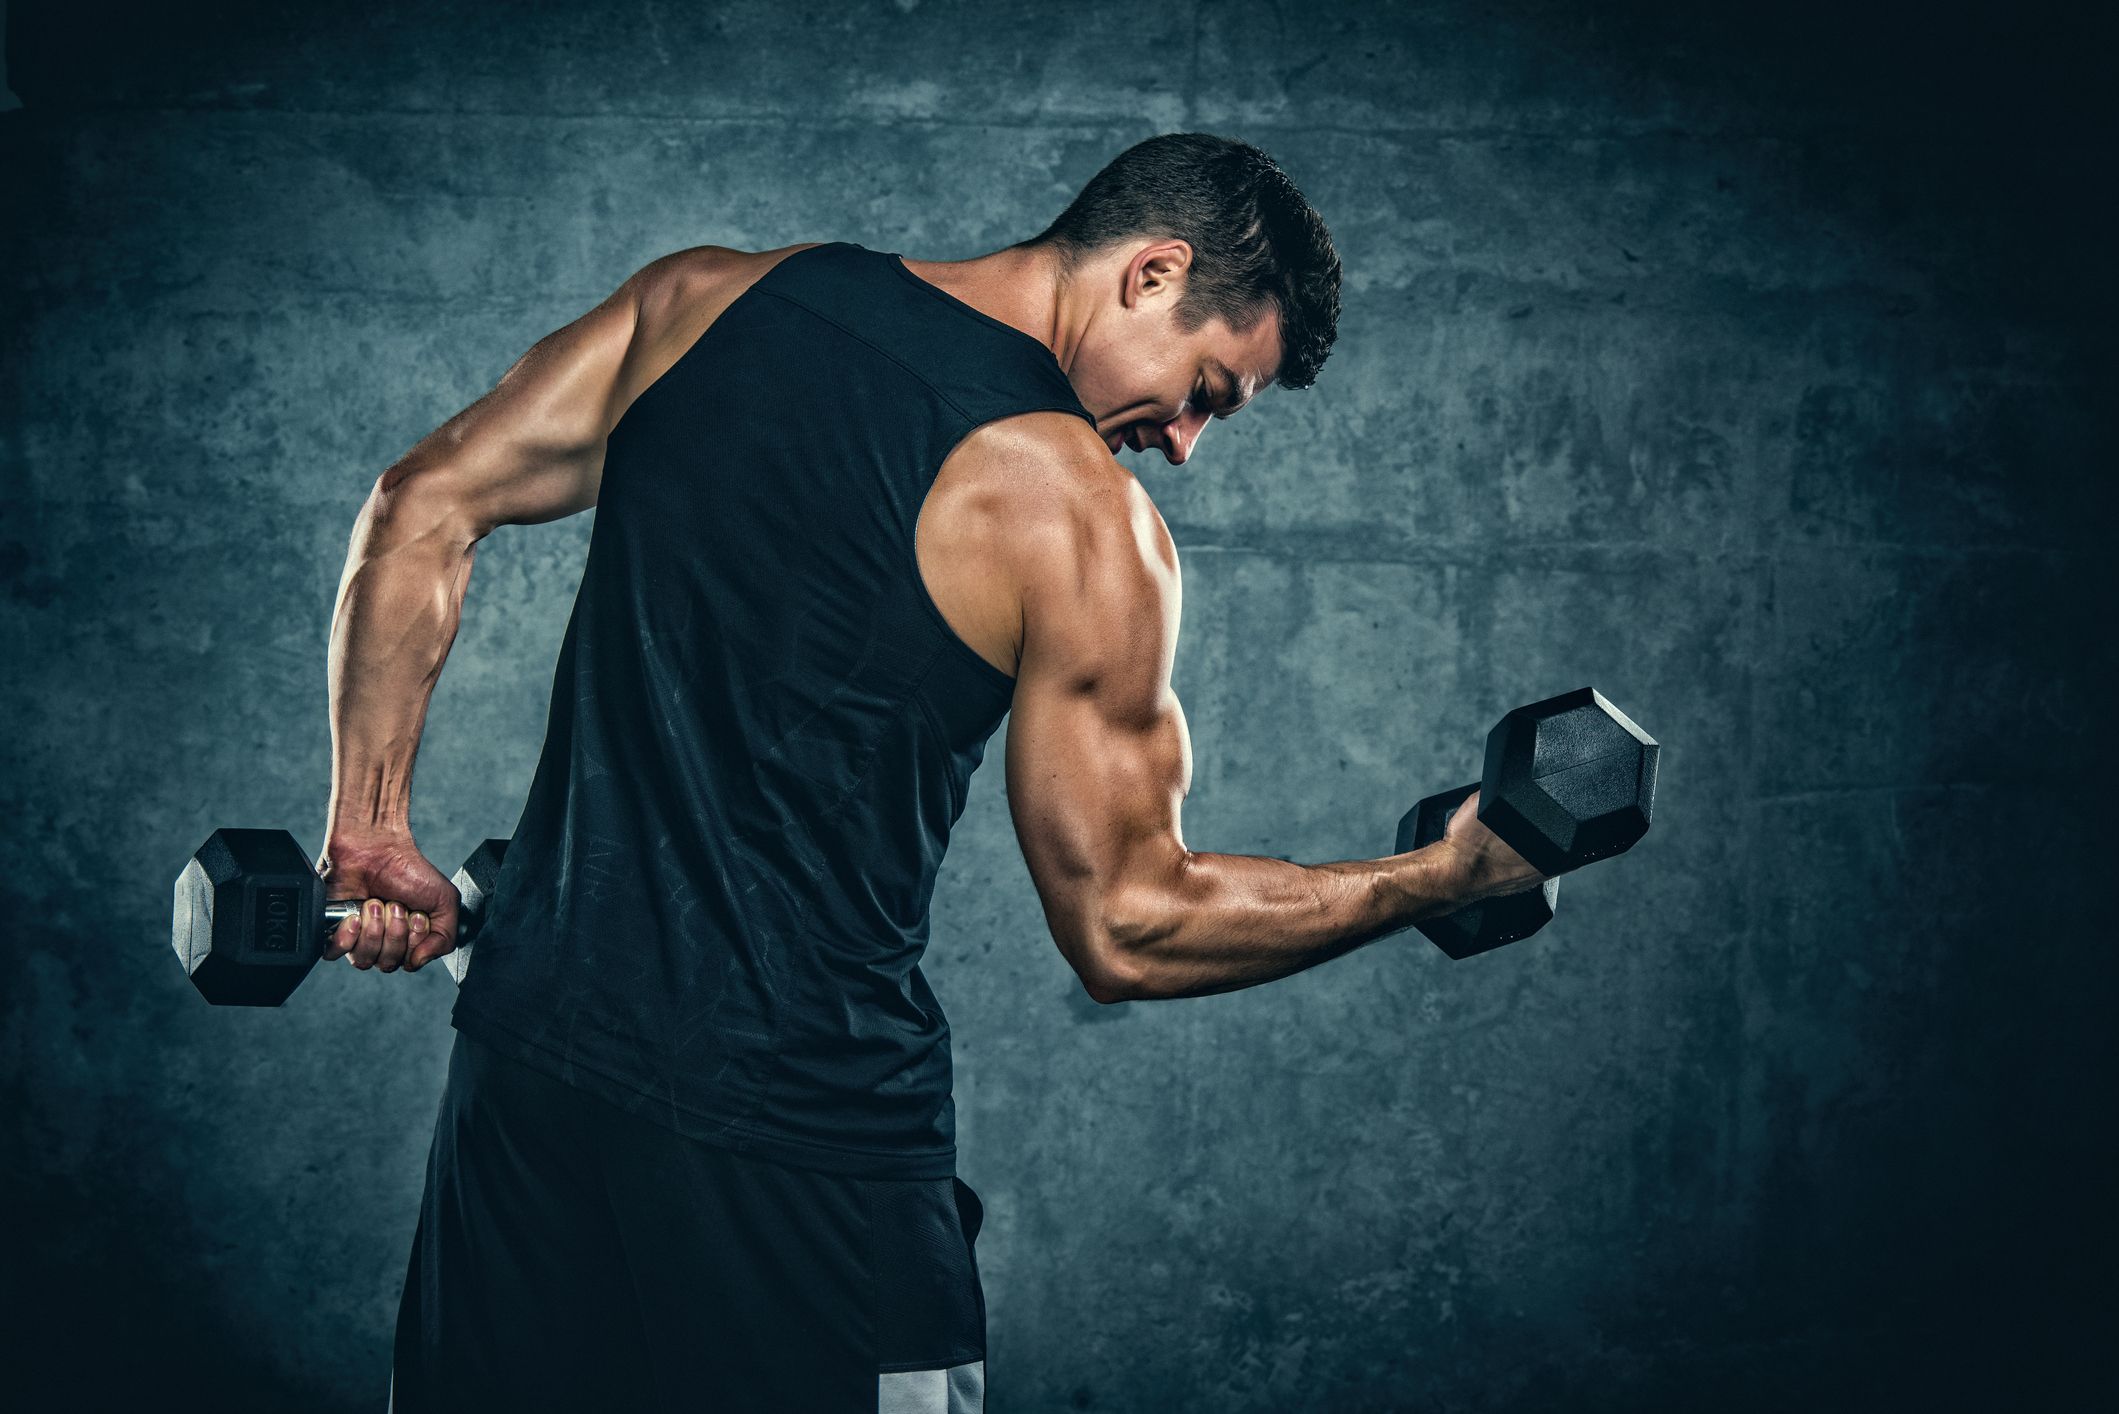 DUMBBELL DEADLIFT - Exercises, workouts and routines